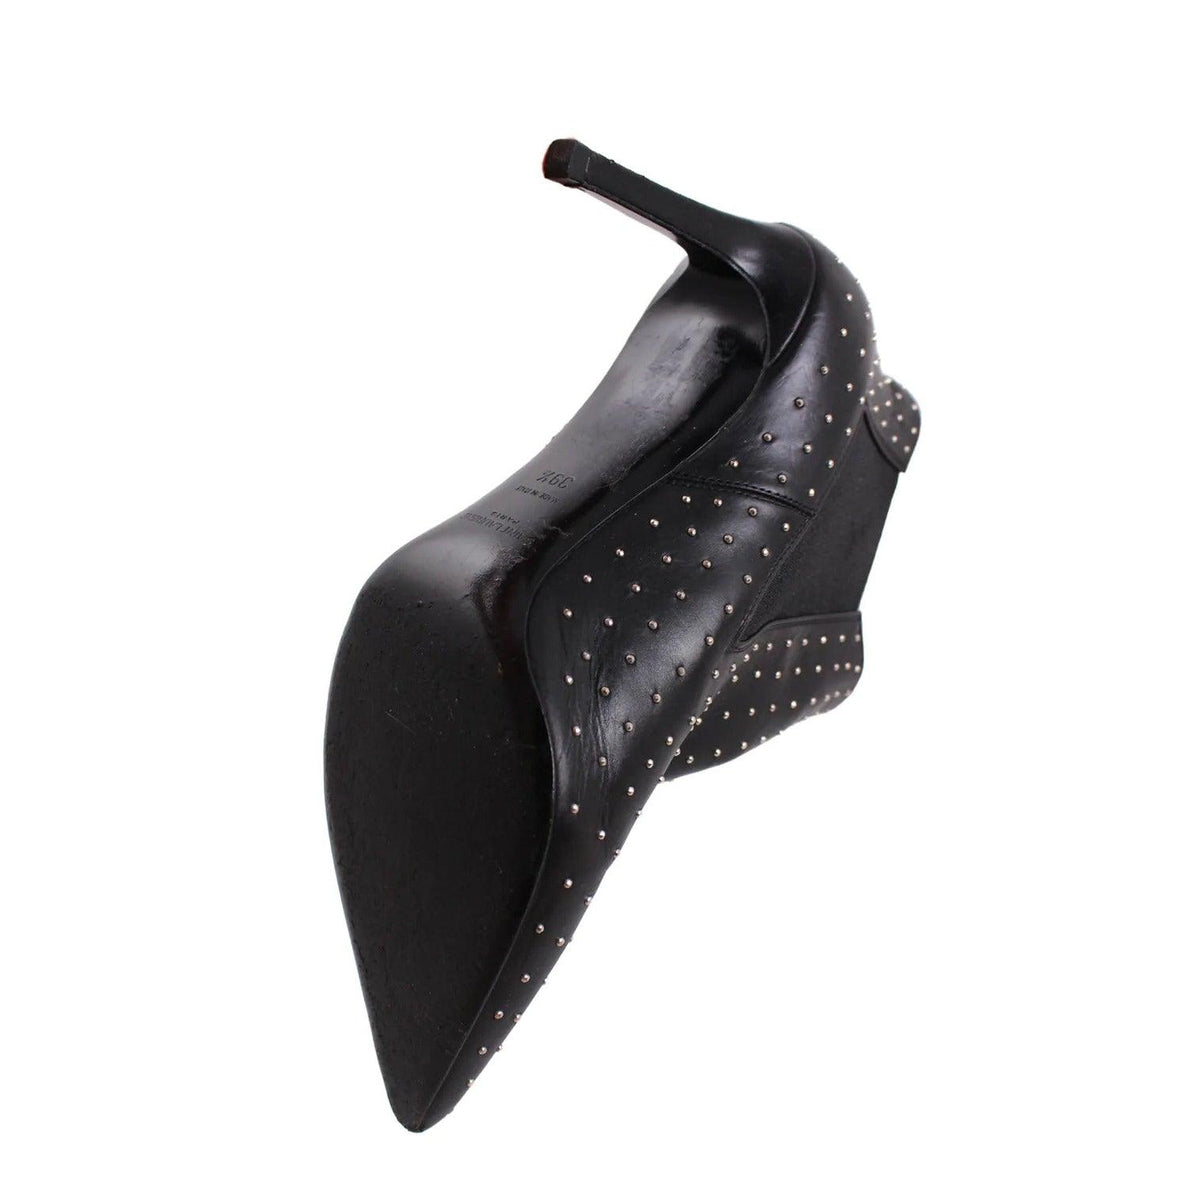 Pre-owned SAINT LAURENT Black Leather Pointed Toe Booties |  Size EU 39.5 - US 8.5 - theREMODA